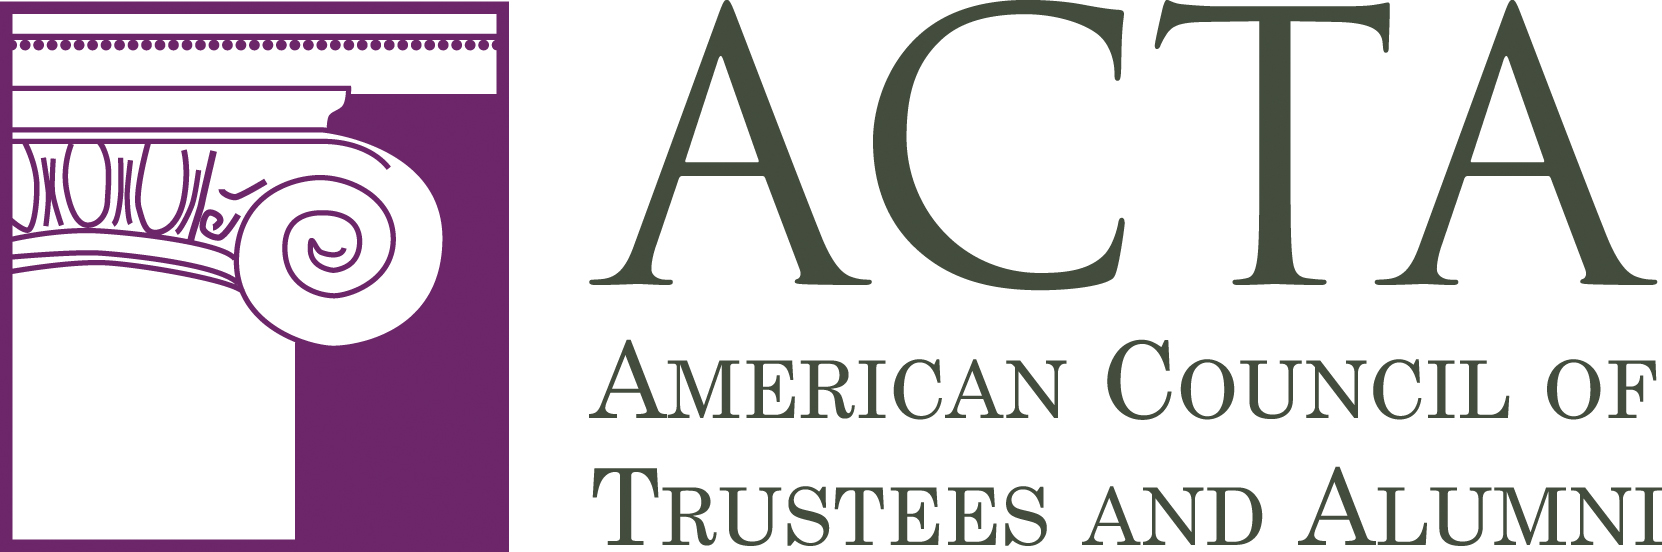 American Council of Trustees and Alumni